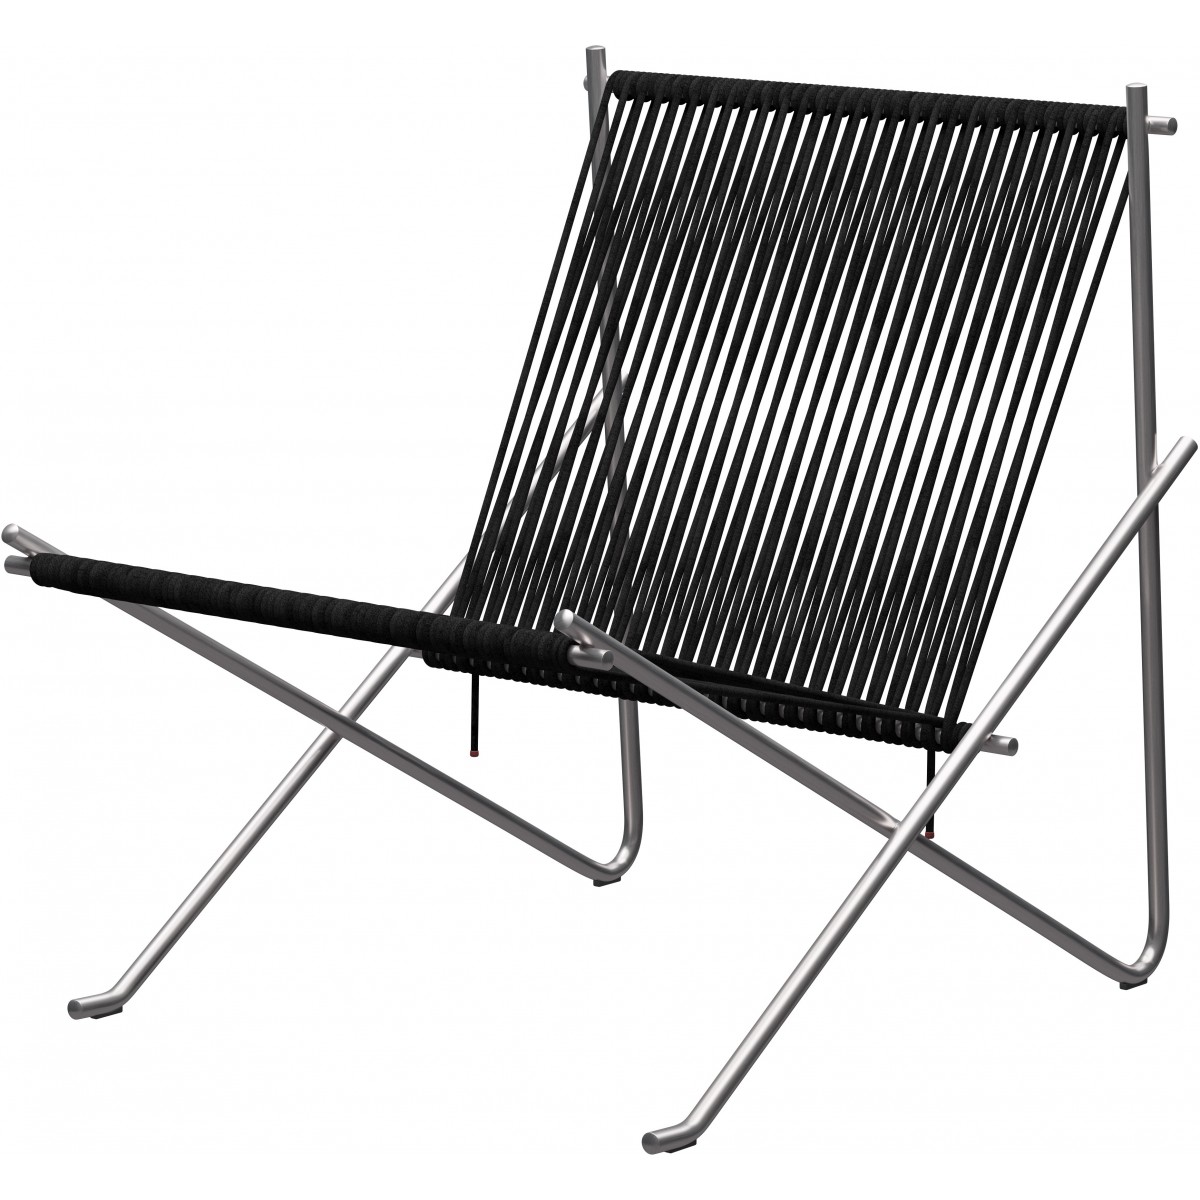 PK4 Lounge chair – Black stainless + Brushed steel